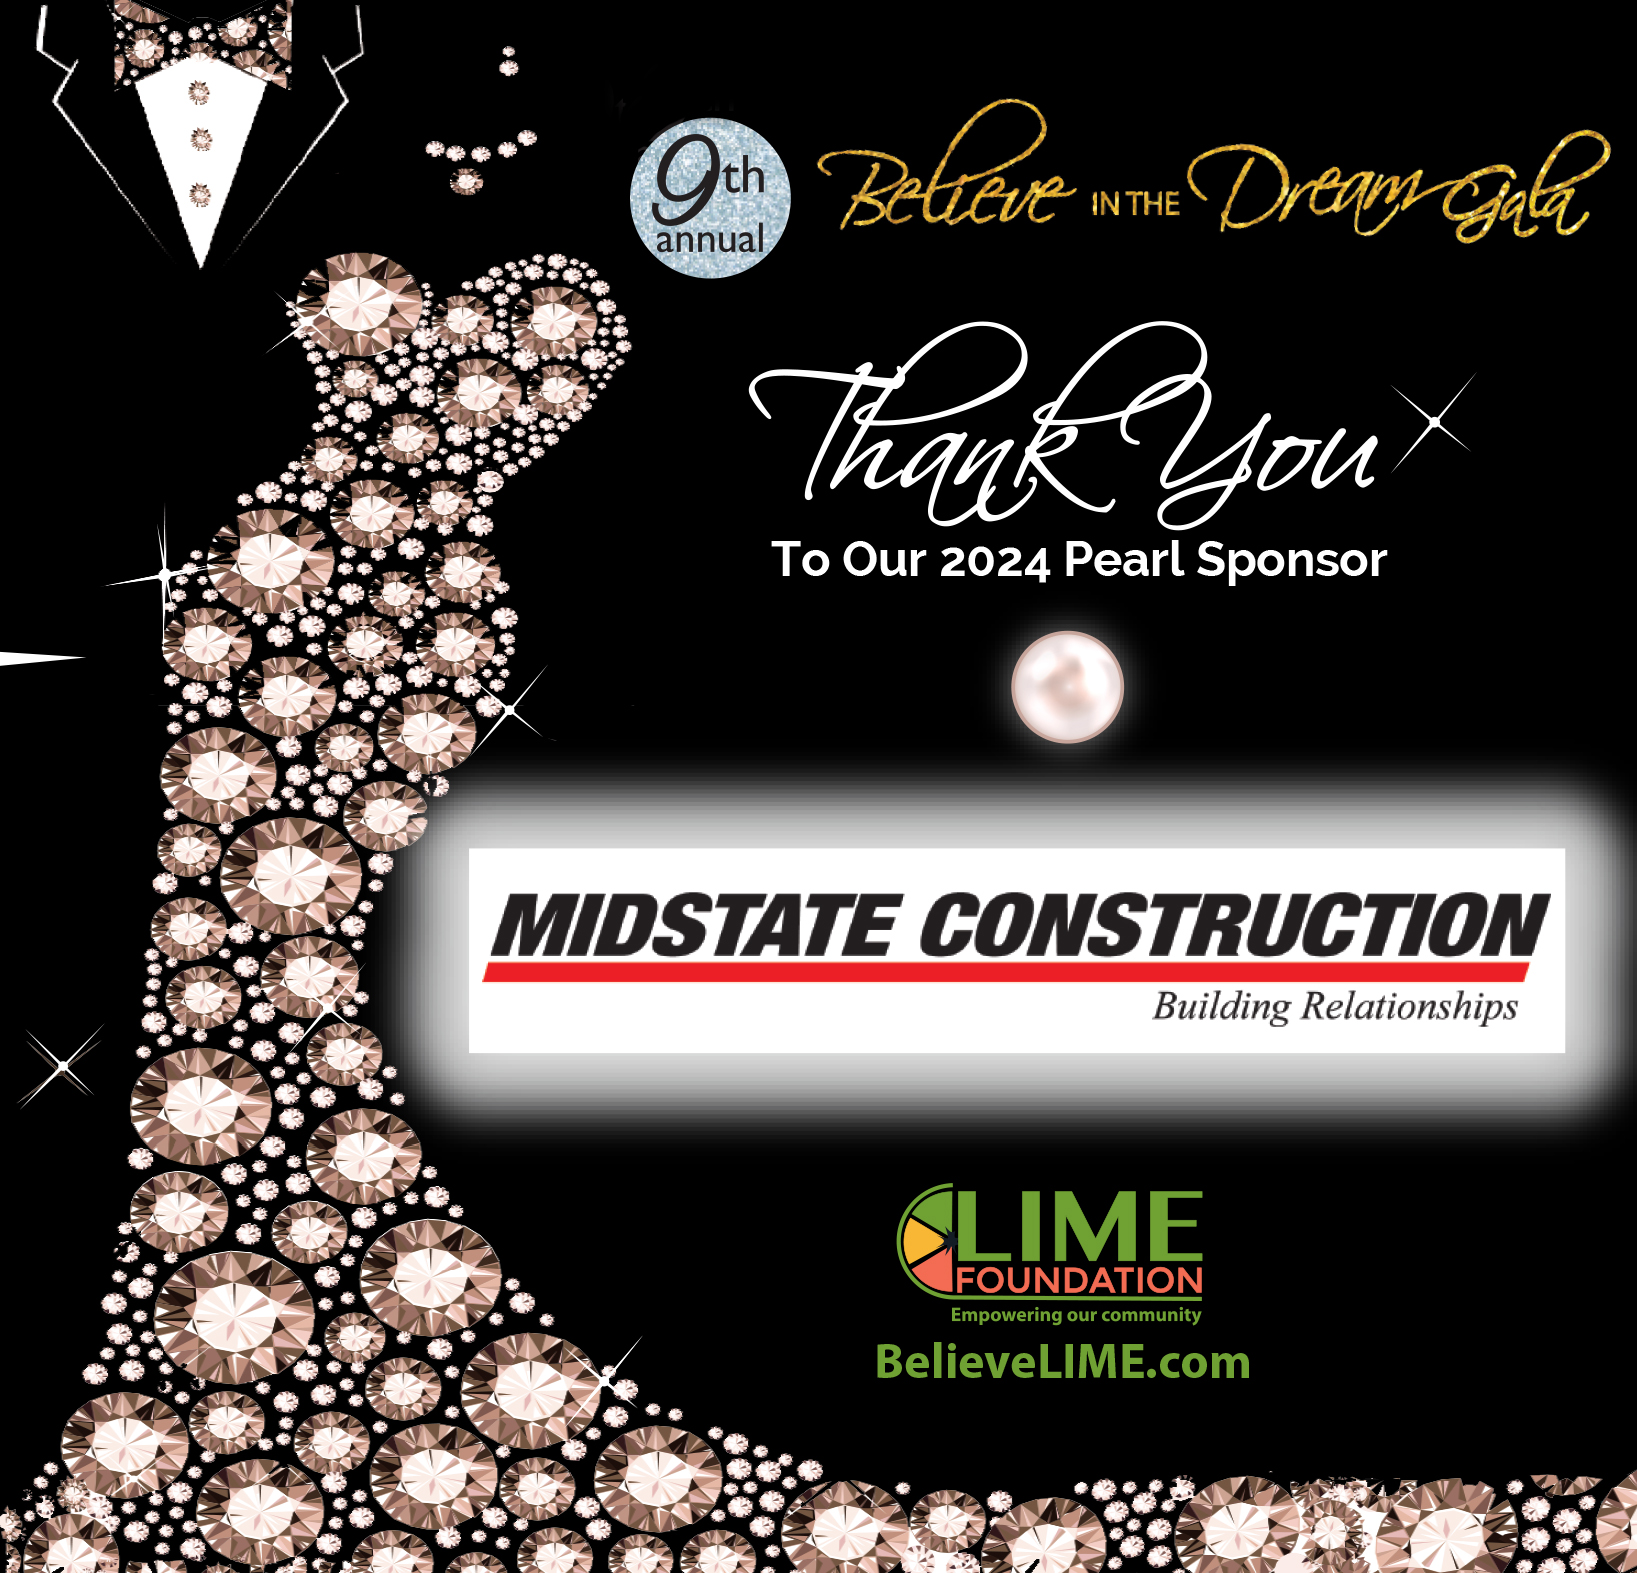 Event poster with a sparkling figure made of diamonds, thanking Midstate Construction and Lime Foundation on a black background for "Believe The Dream 2024.